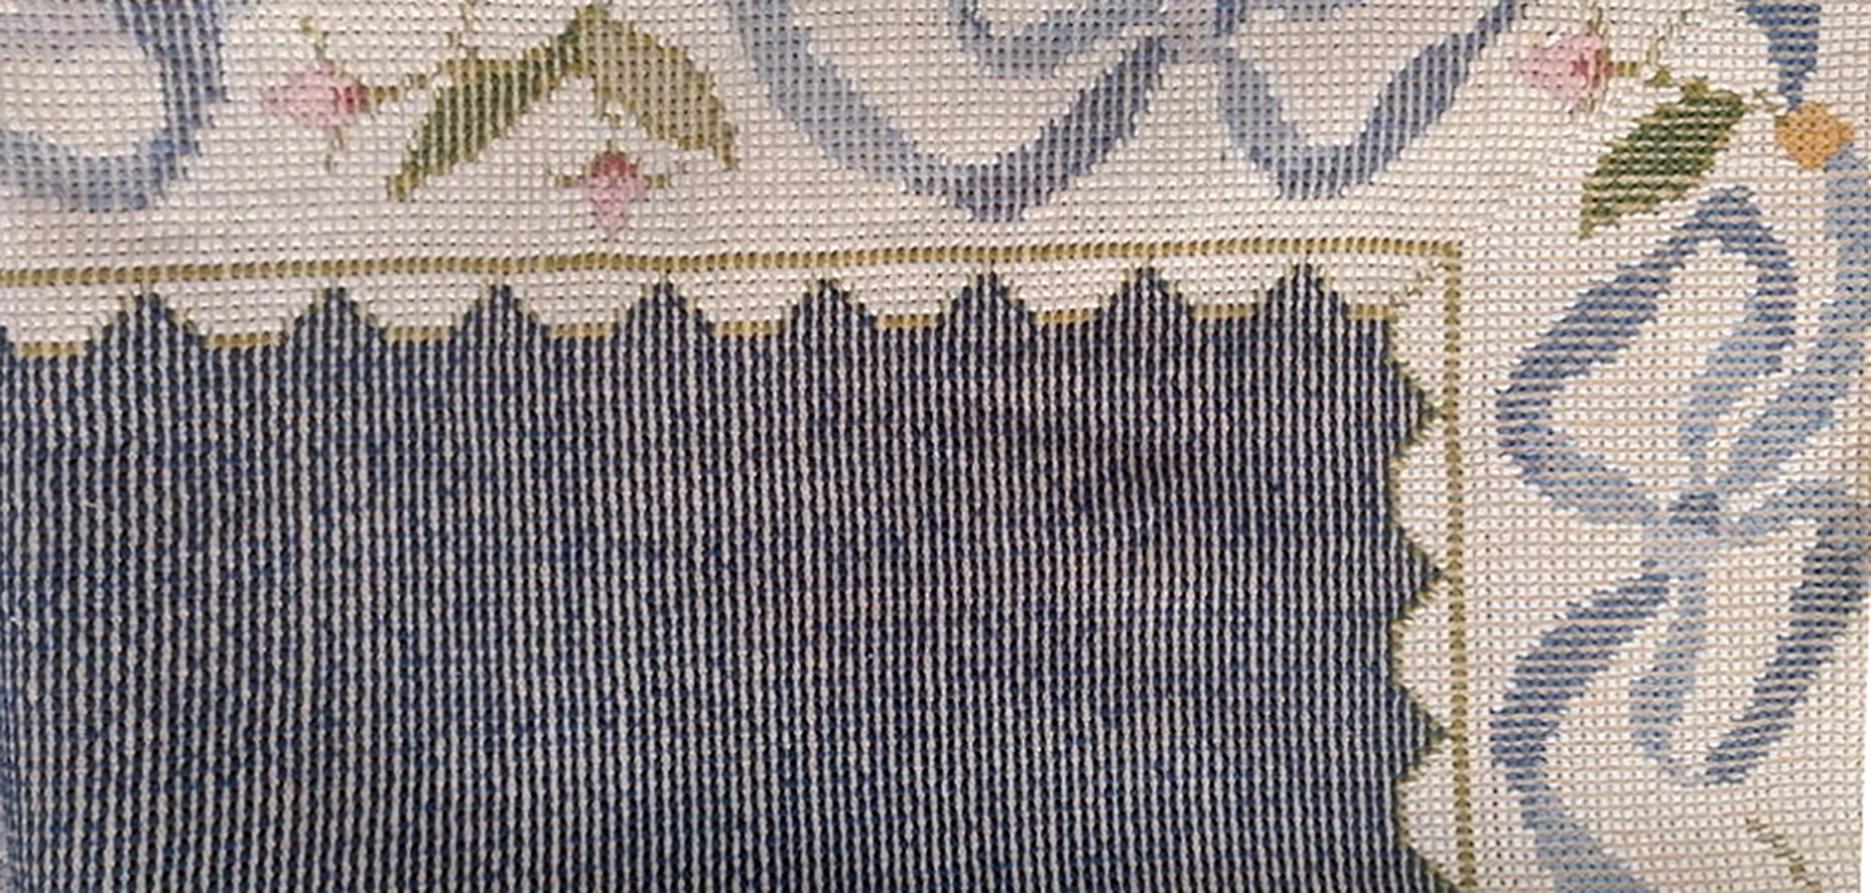 Tapestry Floral European Portuguese Needlepoint Embroidered Arraiolos Rug in Blue & Cream